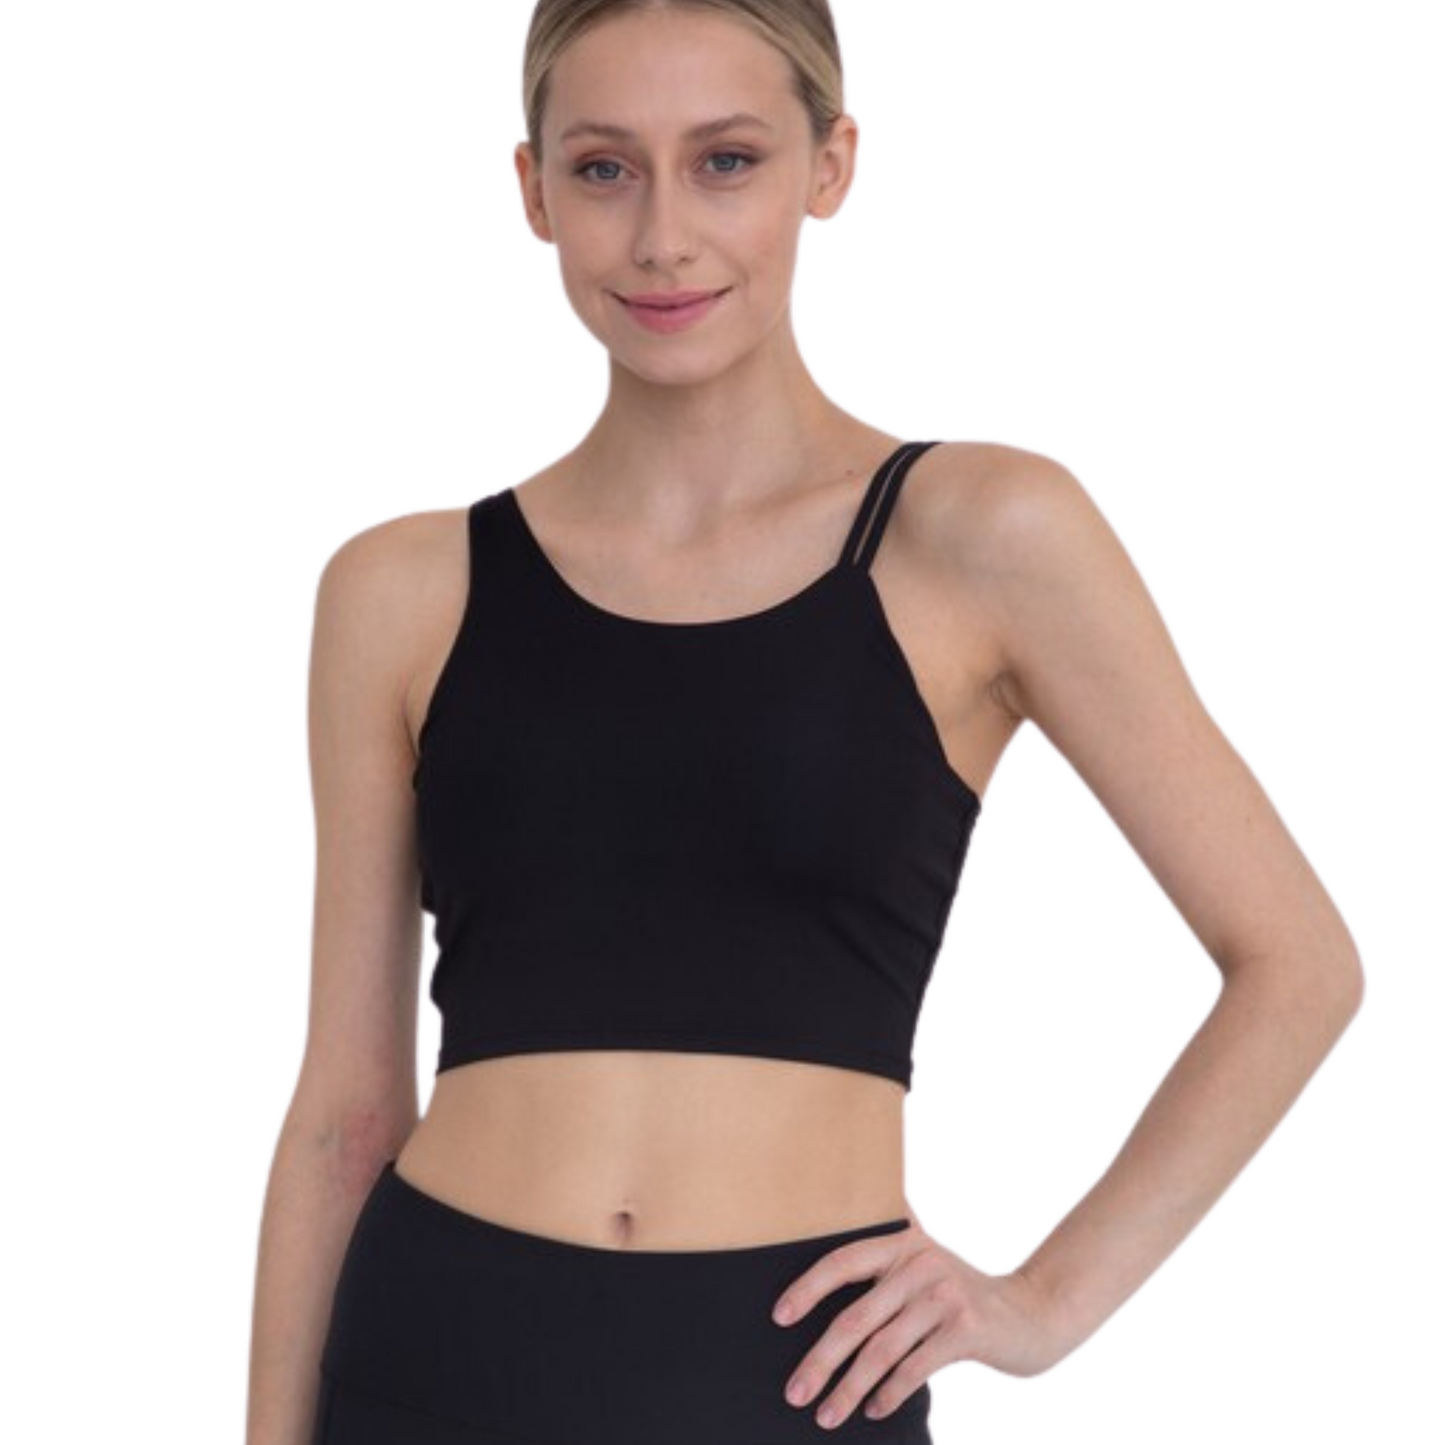 asymmetrical black cropped top. perfect for your next workout